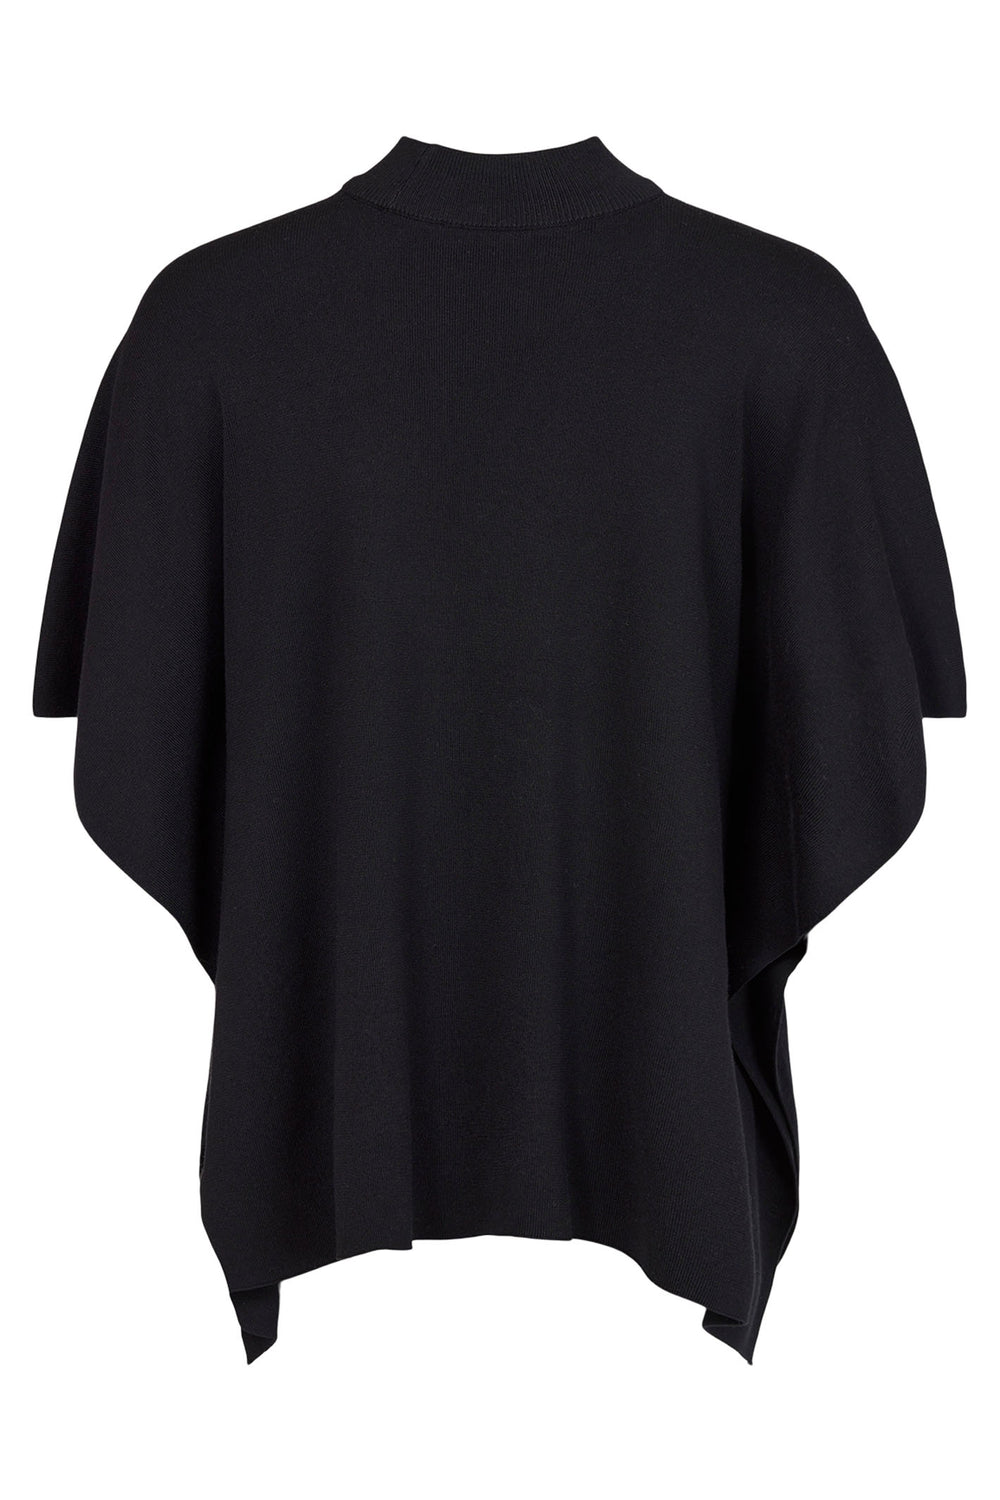 Sunday 6888 Black Knitted Turtle Neck Loose Fit Jumper Cape - Experience Boutique